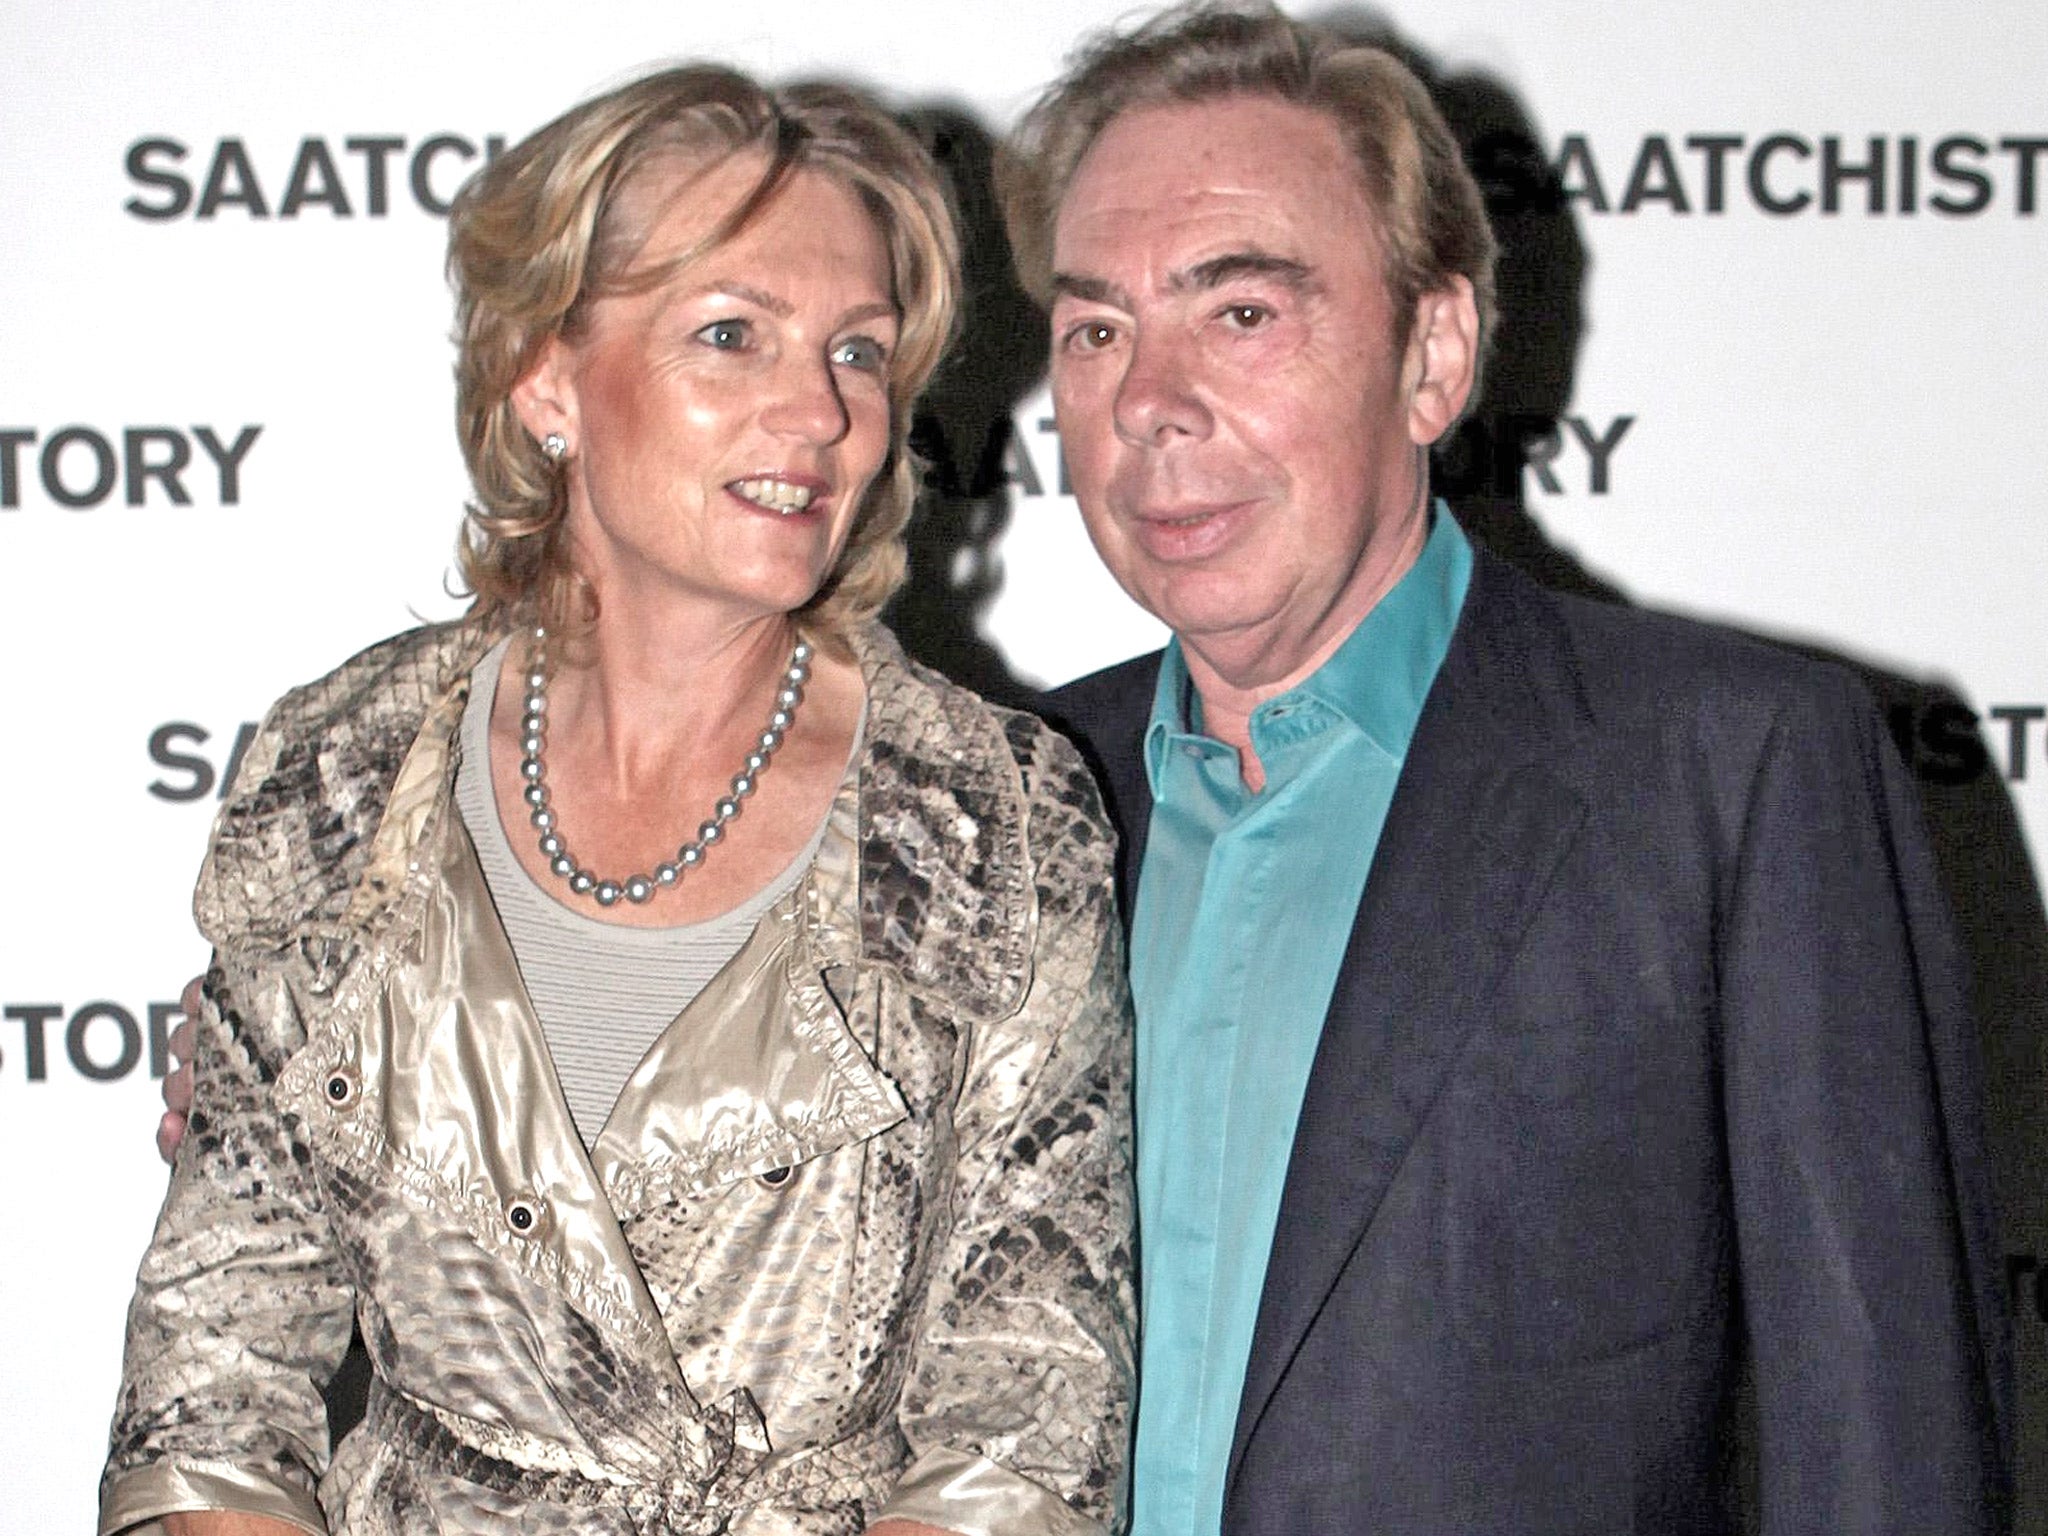 Andrew Lloyd Webber and his wife Madeleine’s foundation donated £150,000 to the project